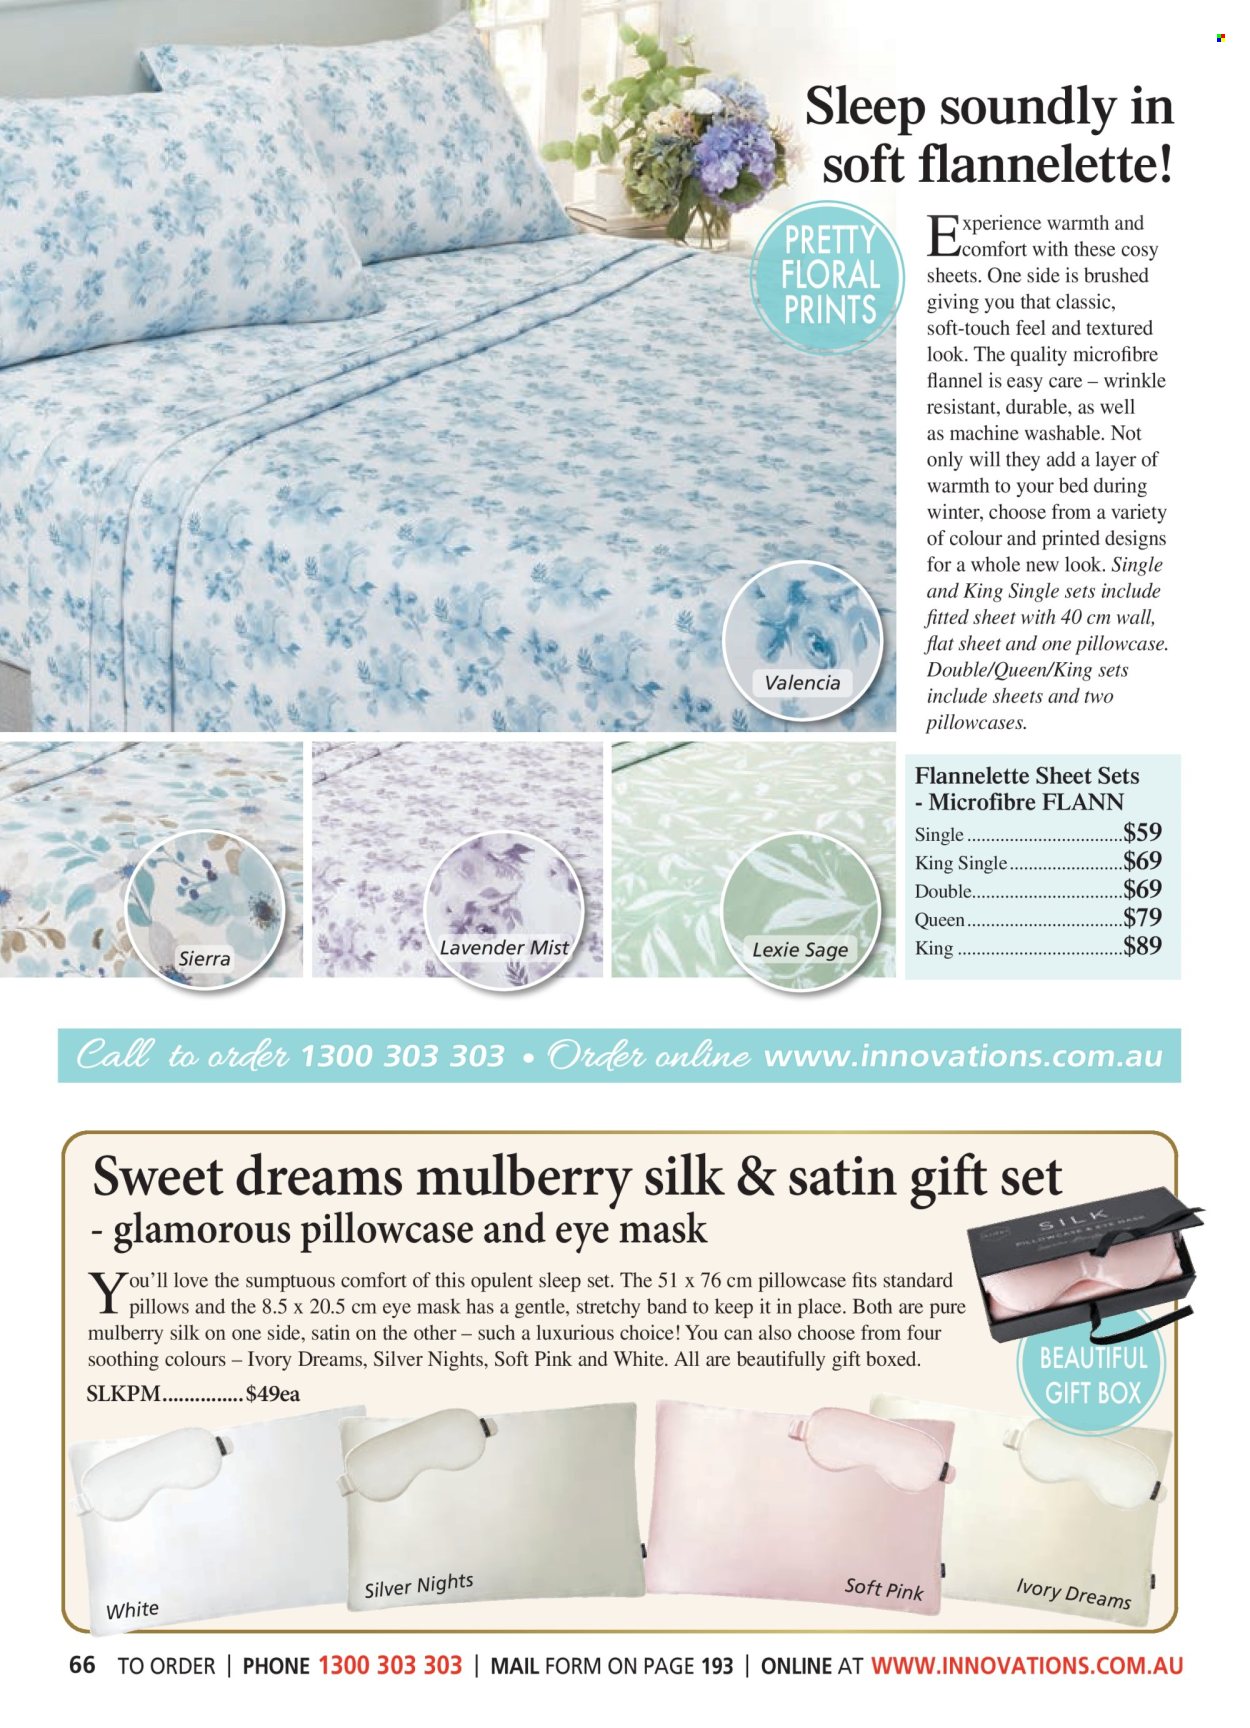 thumbnail - Innovations Catalogue - Sales products - gift set, gift box, bedding, pillow, pillowcase, flannelette sheets, bed sheet, sleep set. Page 66.